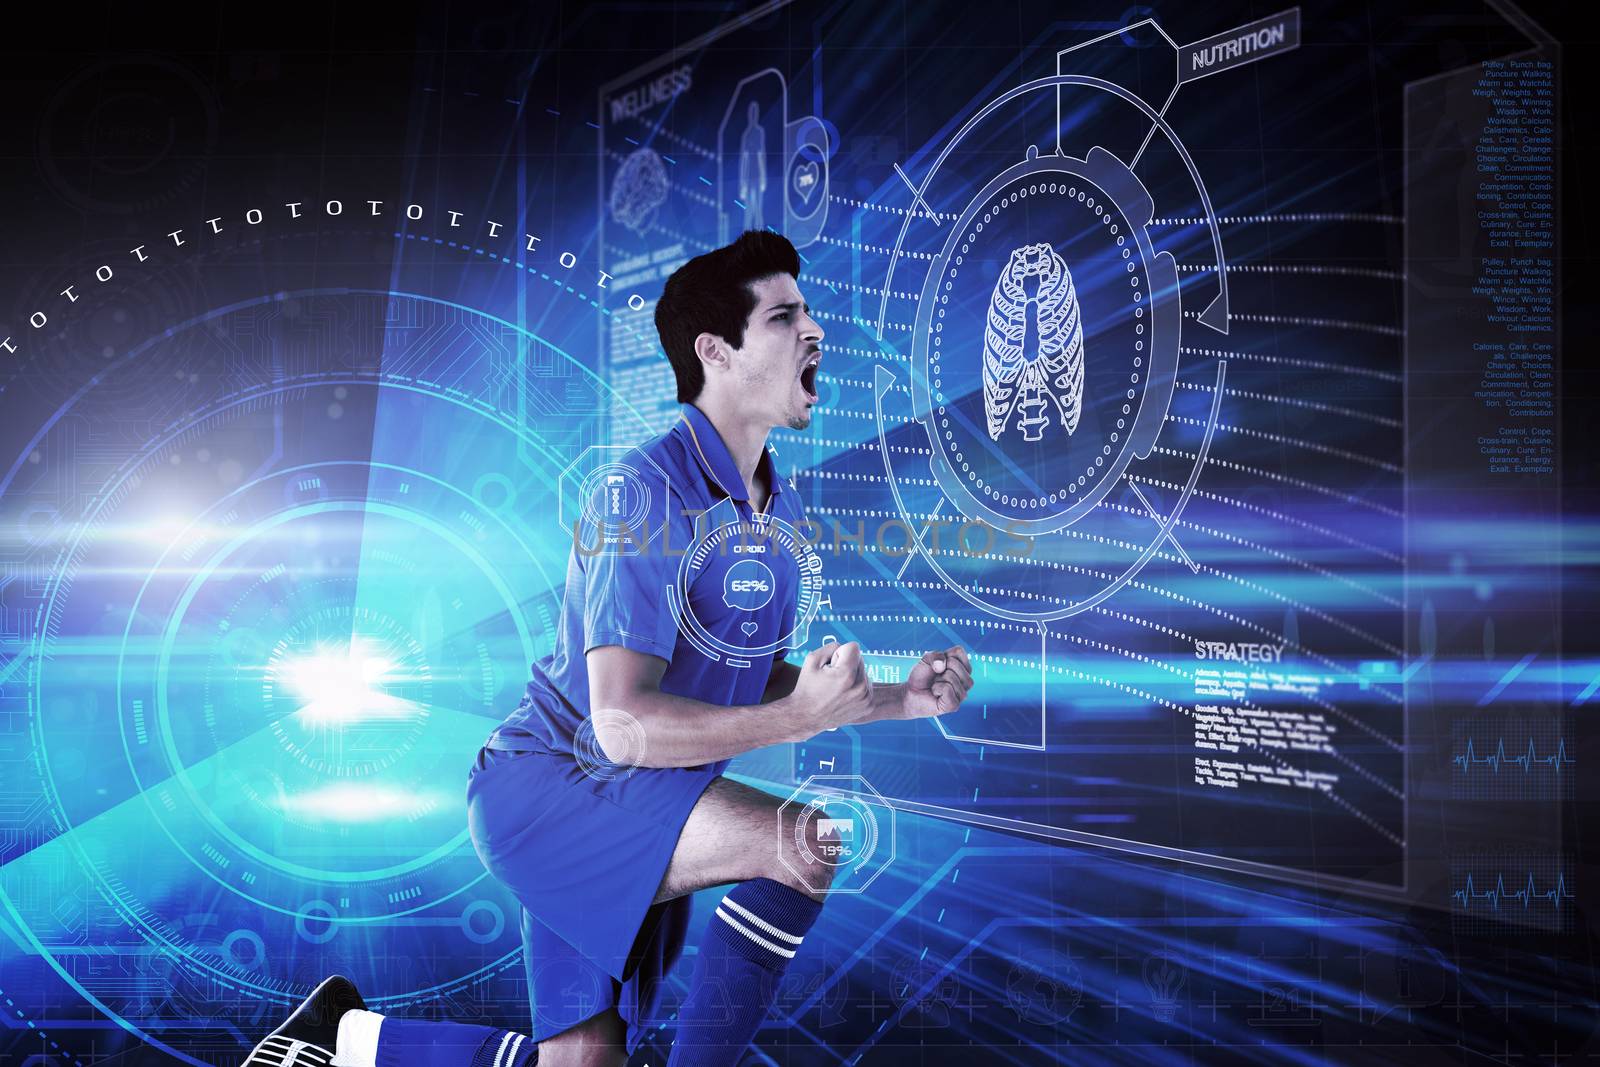 Cheering football player against blue technology background